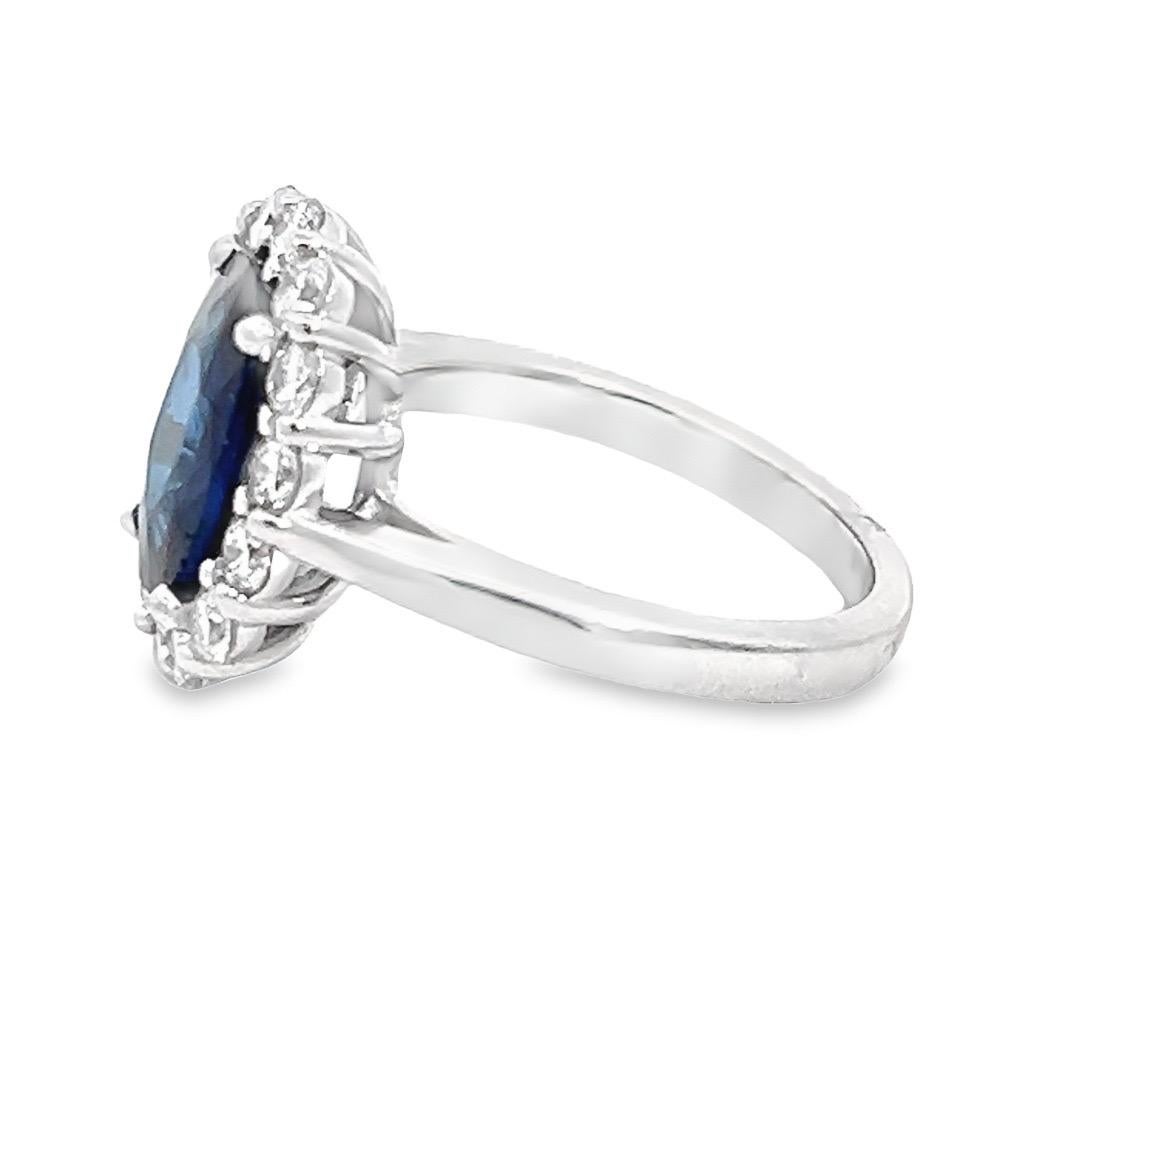 Women's or Men's Natural Blue Sapphire Diamond Ring in 18k White Gold - Lady D Style For Sale